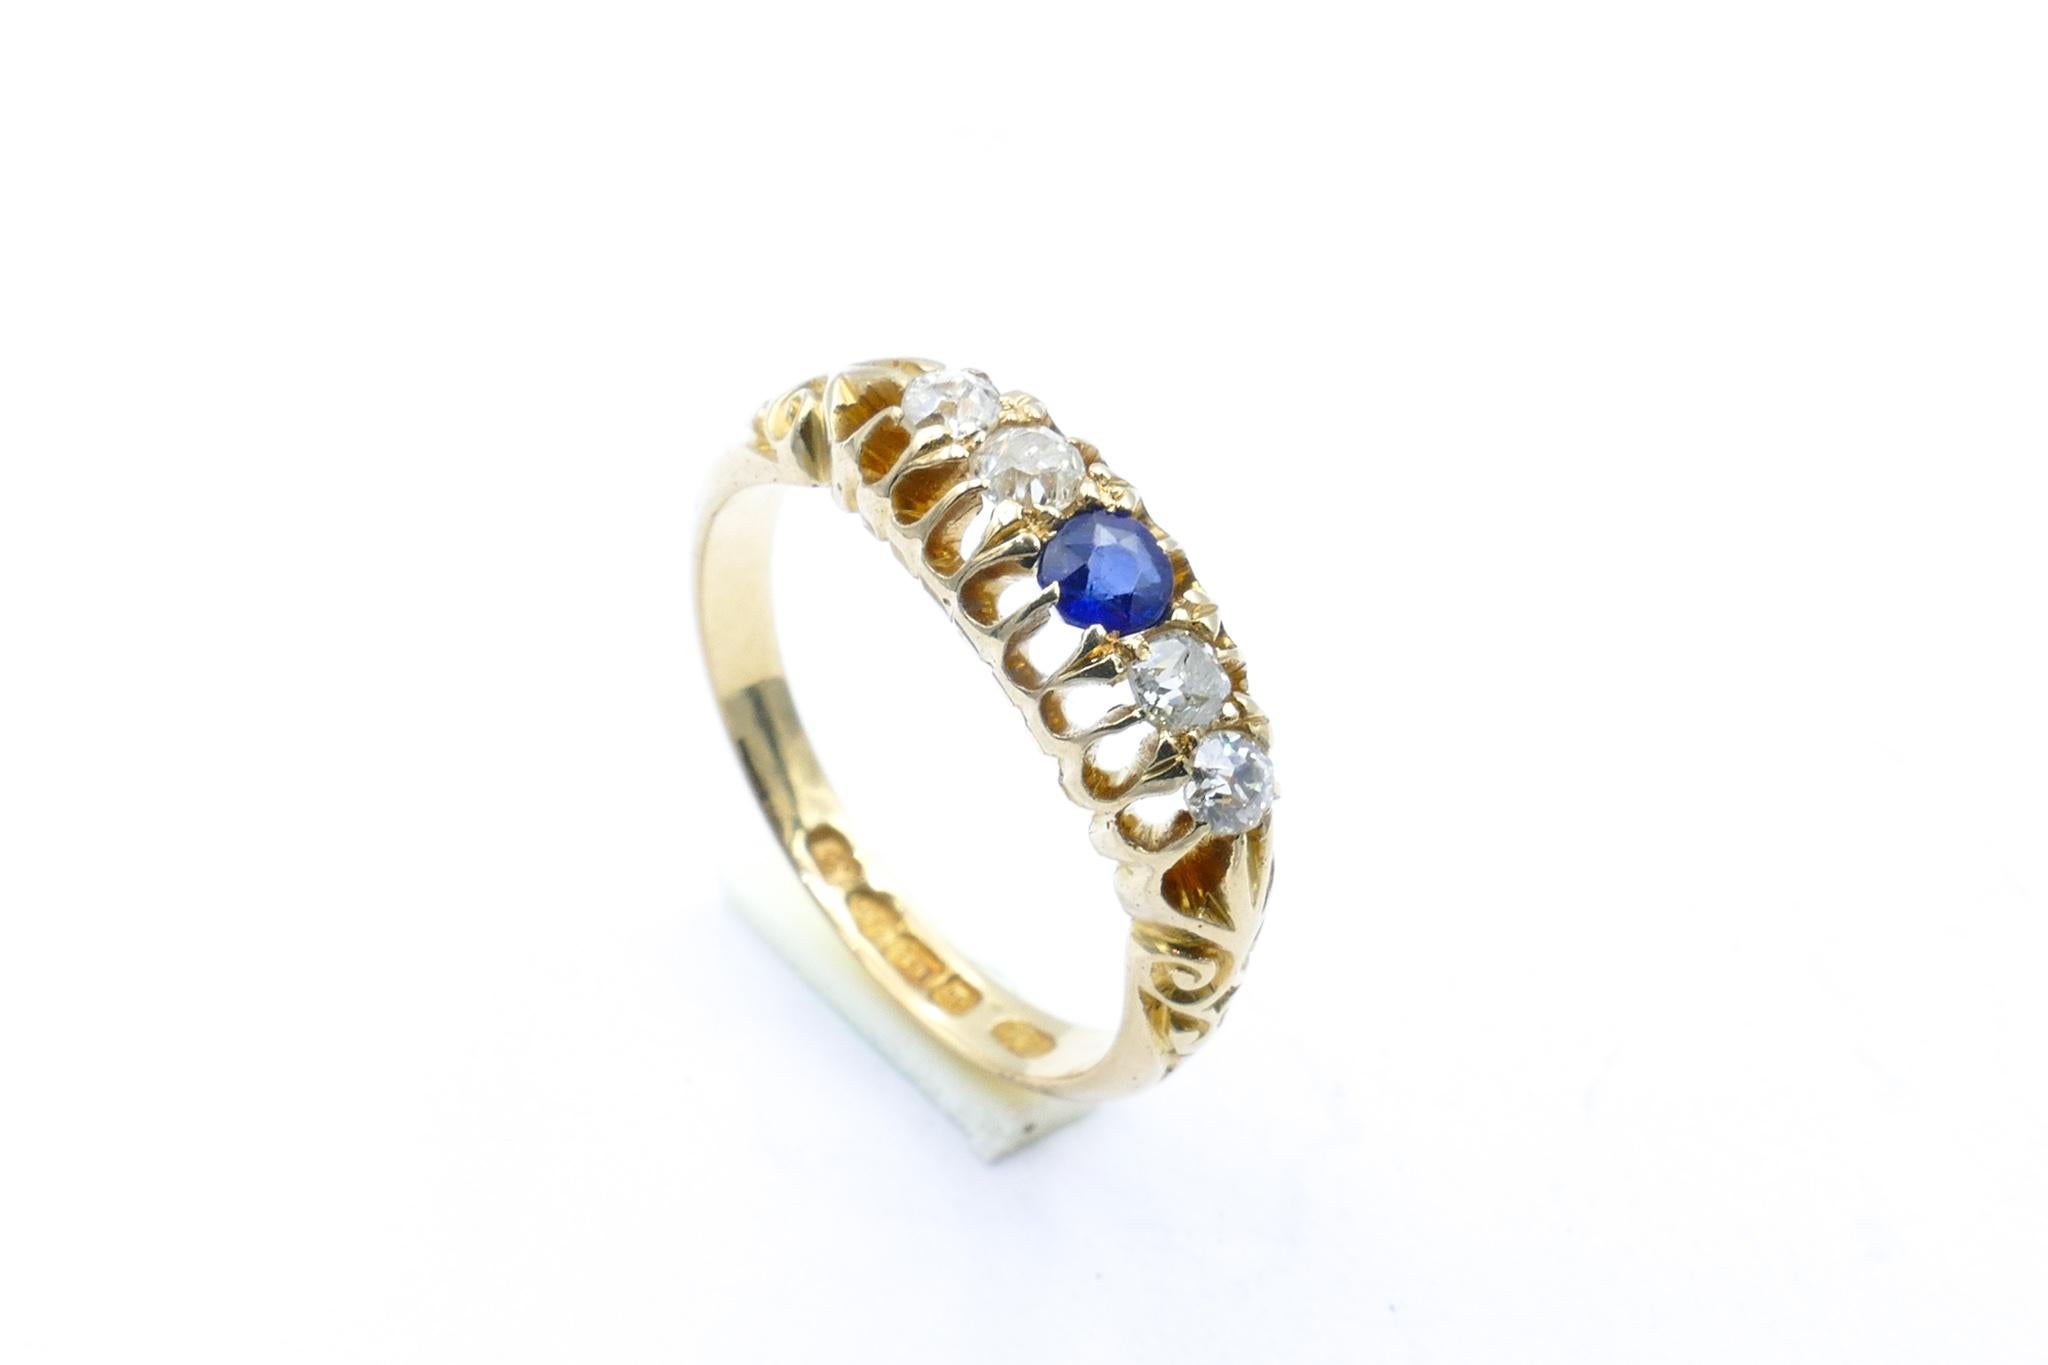 This gorgeous Antique Ring is in excellent condition.
Such a good reminder of the fabulously stylish Edwardian Era too.
It features 1 x deep blue Sapphire with 4 x good quality Diamonds on either side, the whole set in 18ct Yellow Gold.
Just a